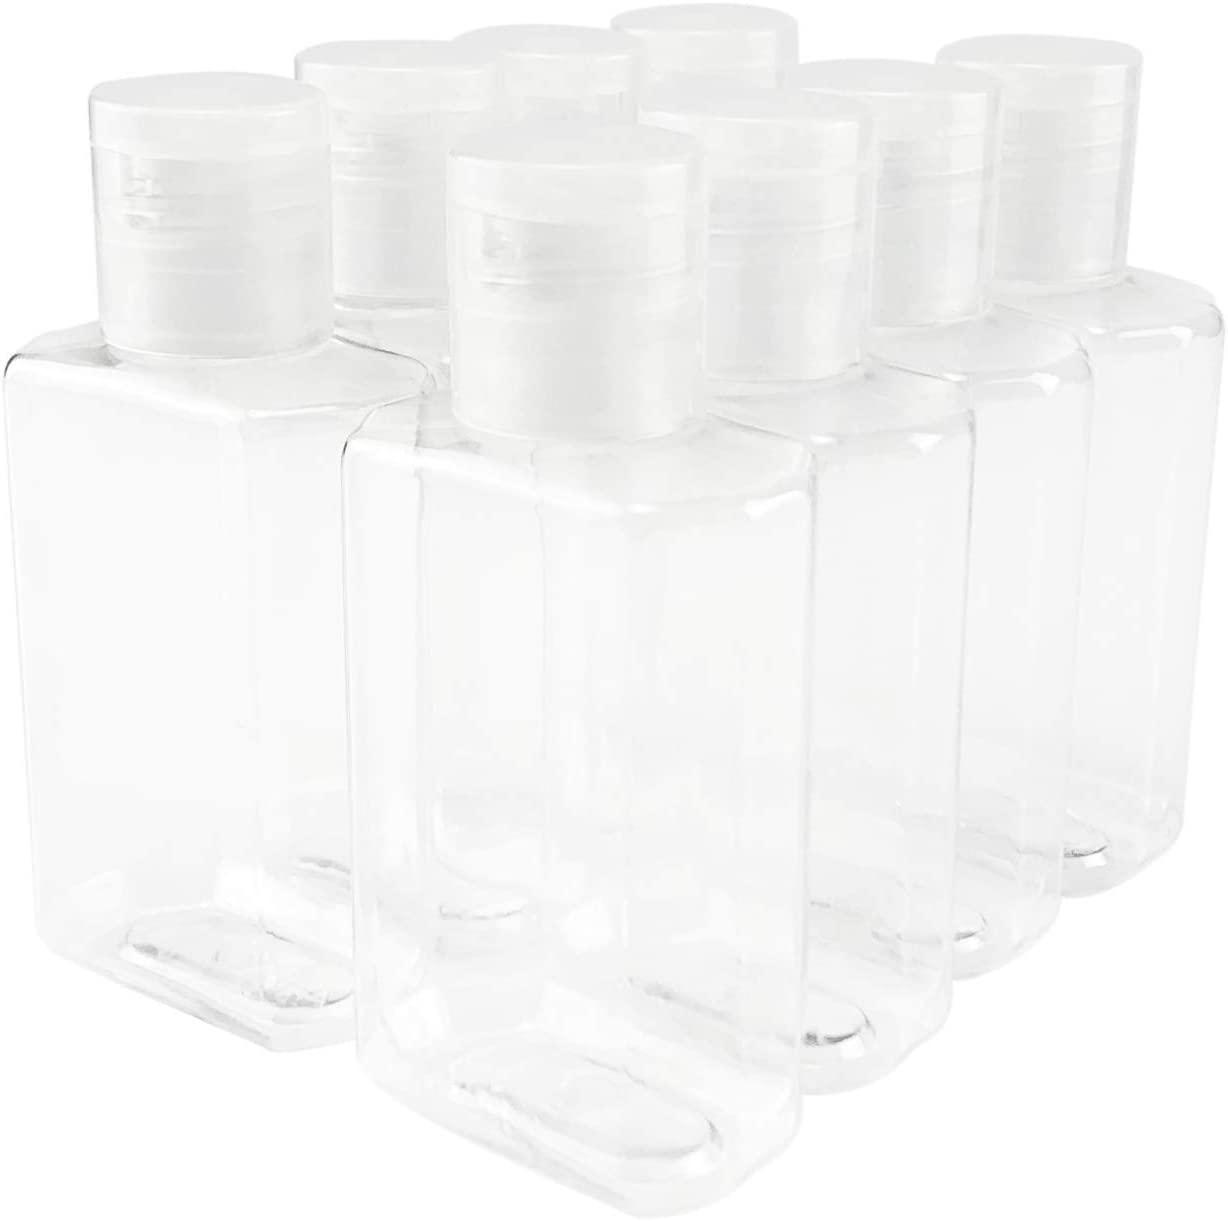 nsb herbals 50ml Empty Clear Plastic Bottles Refillable Travel Size  Cosmetic Containers Small Squeeze Bottles With Black Flip Cap For  Toiletries, Sham